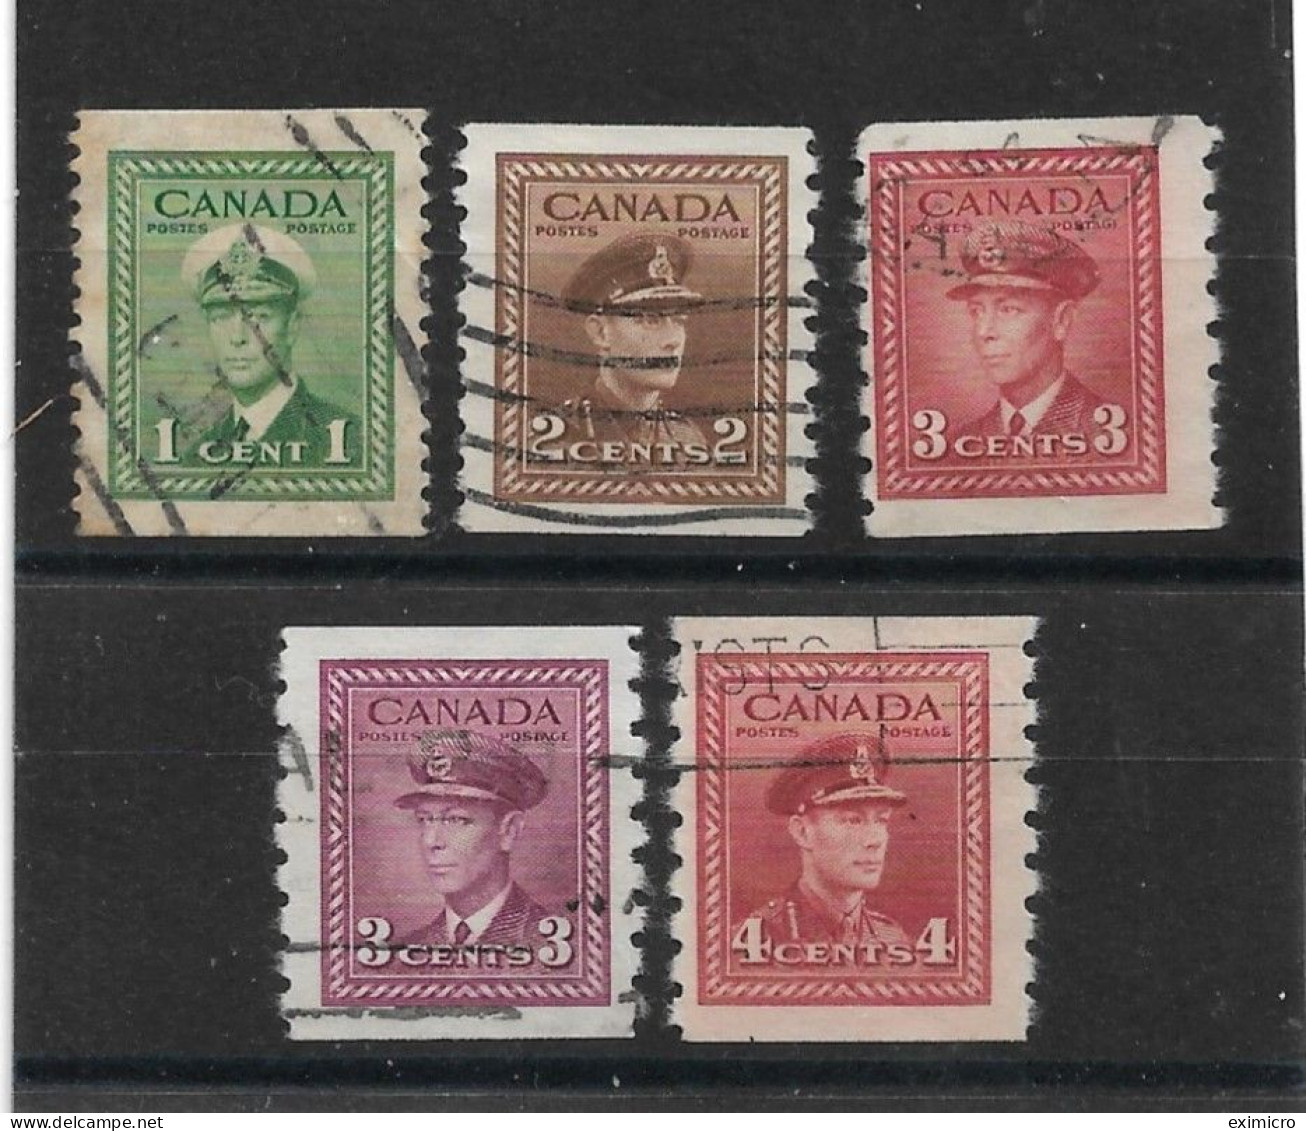 CANADA 1942 - 1943 COIL STAMPS SET IMPERF X PERF 8 SG 389/393 FINE USED Cat £26 - Usati